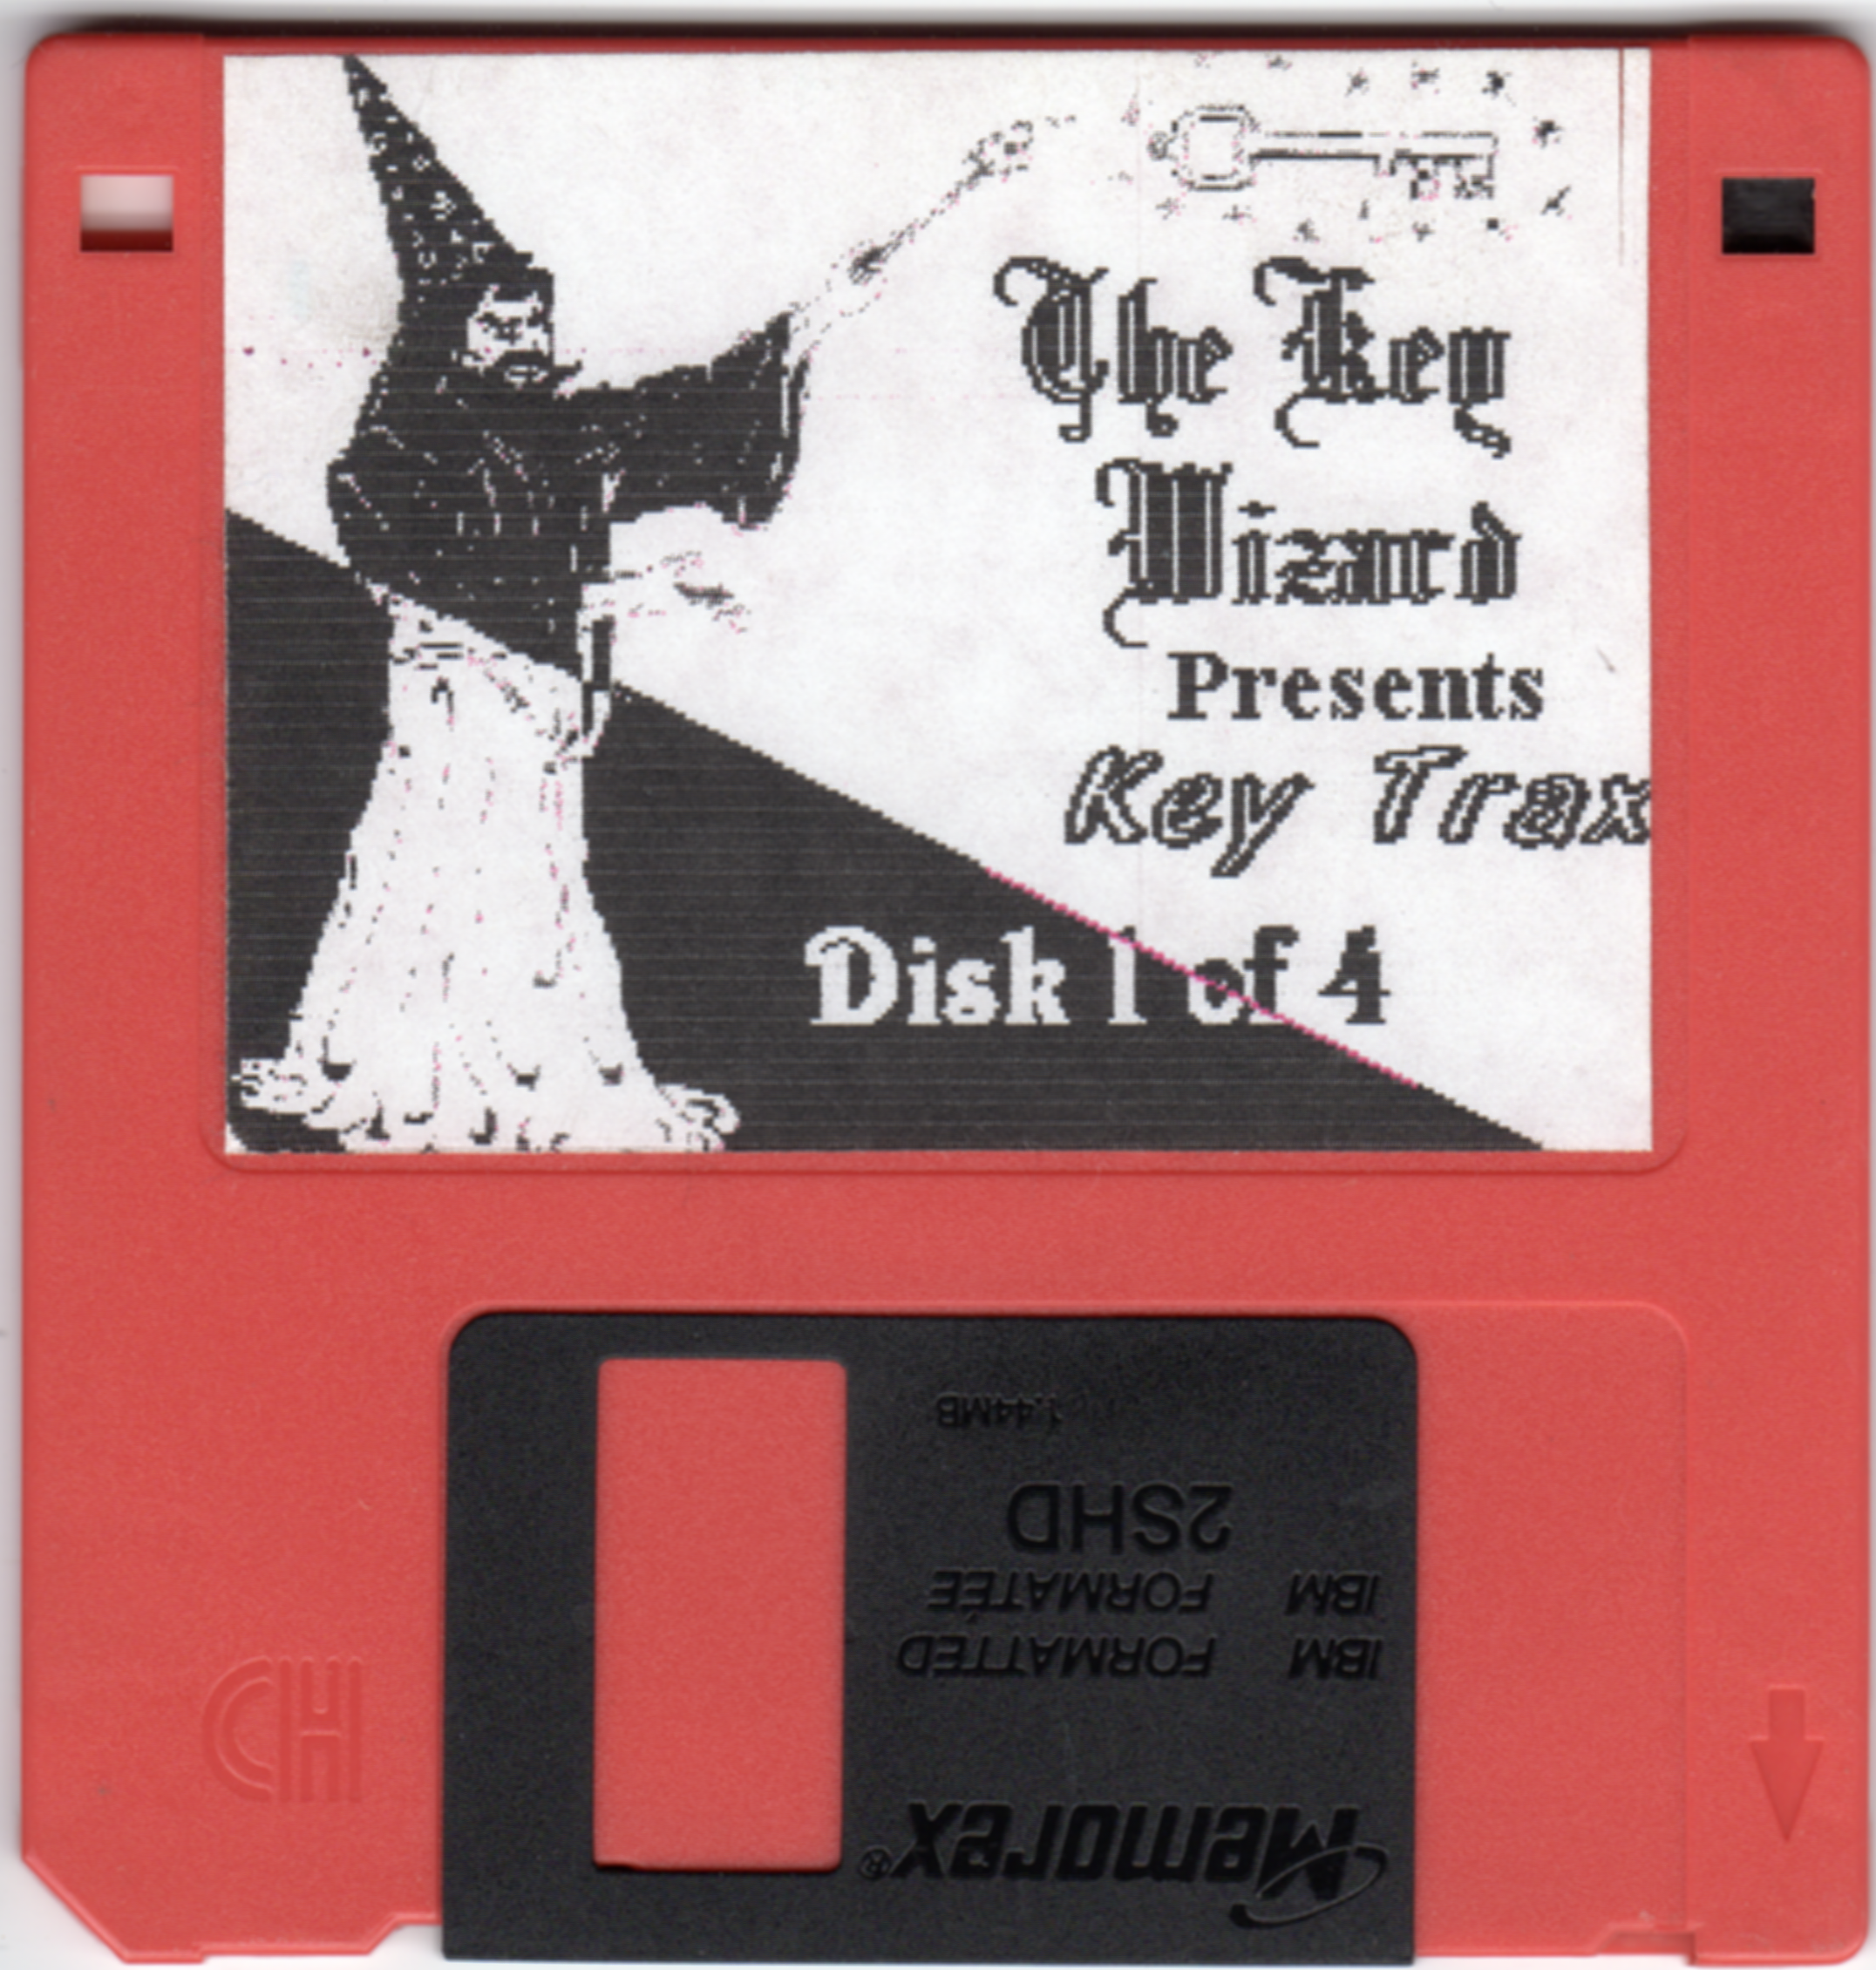 The Original Key Trax Installation Disk, 1 of 4 on 1.44MB floppy disk.